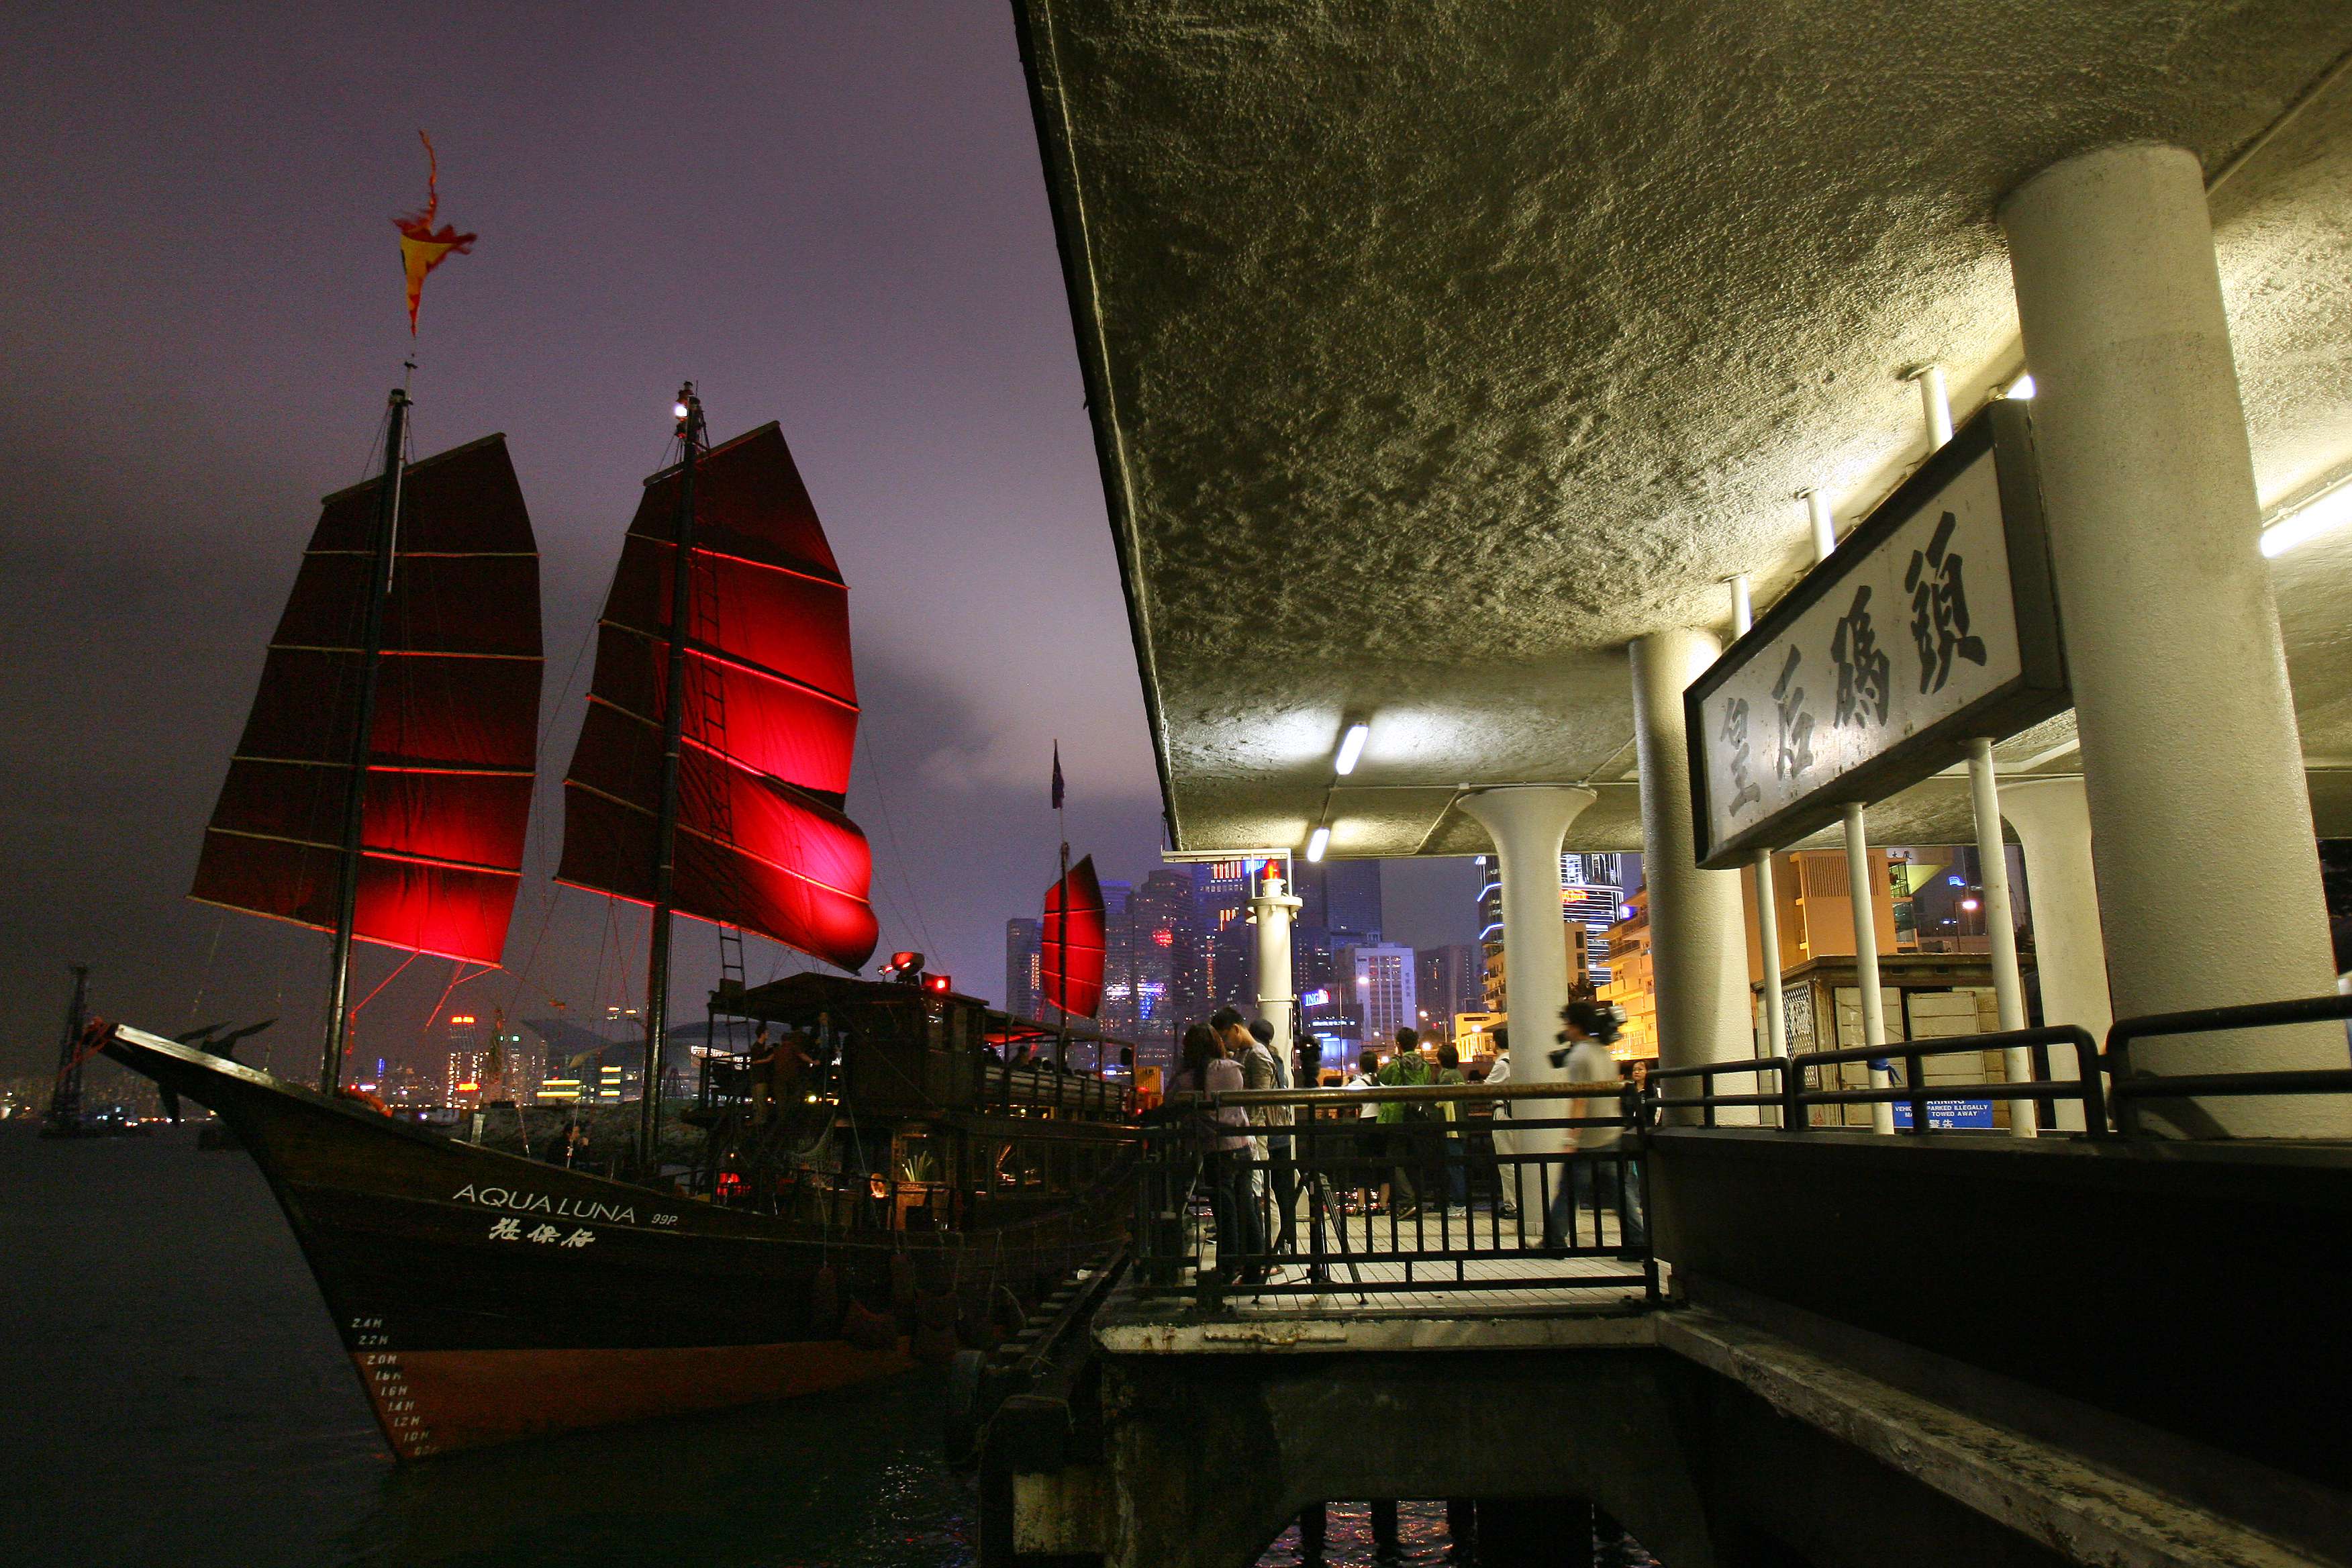 Queen’s Pier before it was dismantled in 2007. Photo: SCMP Pictures